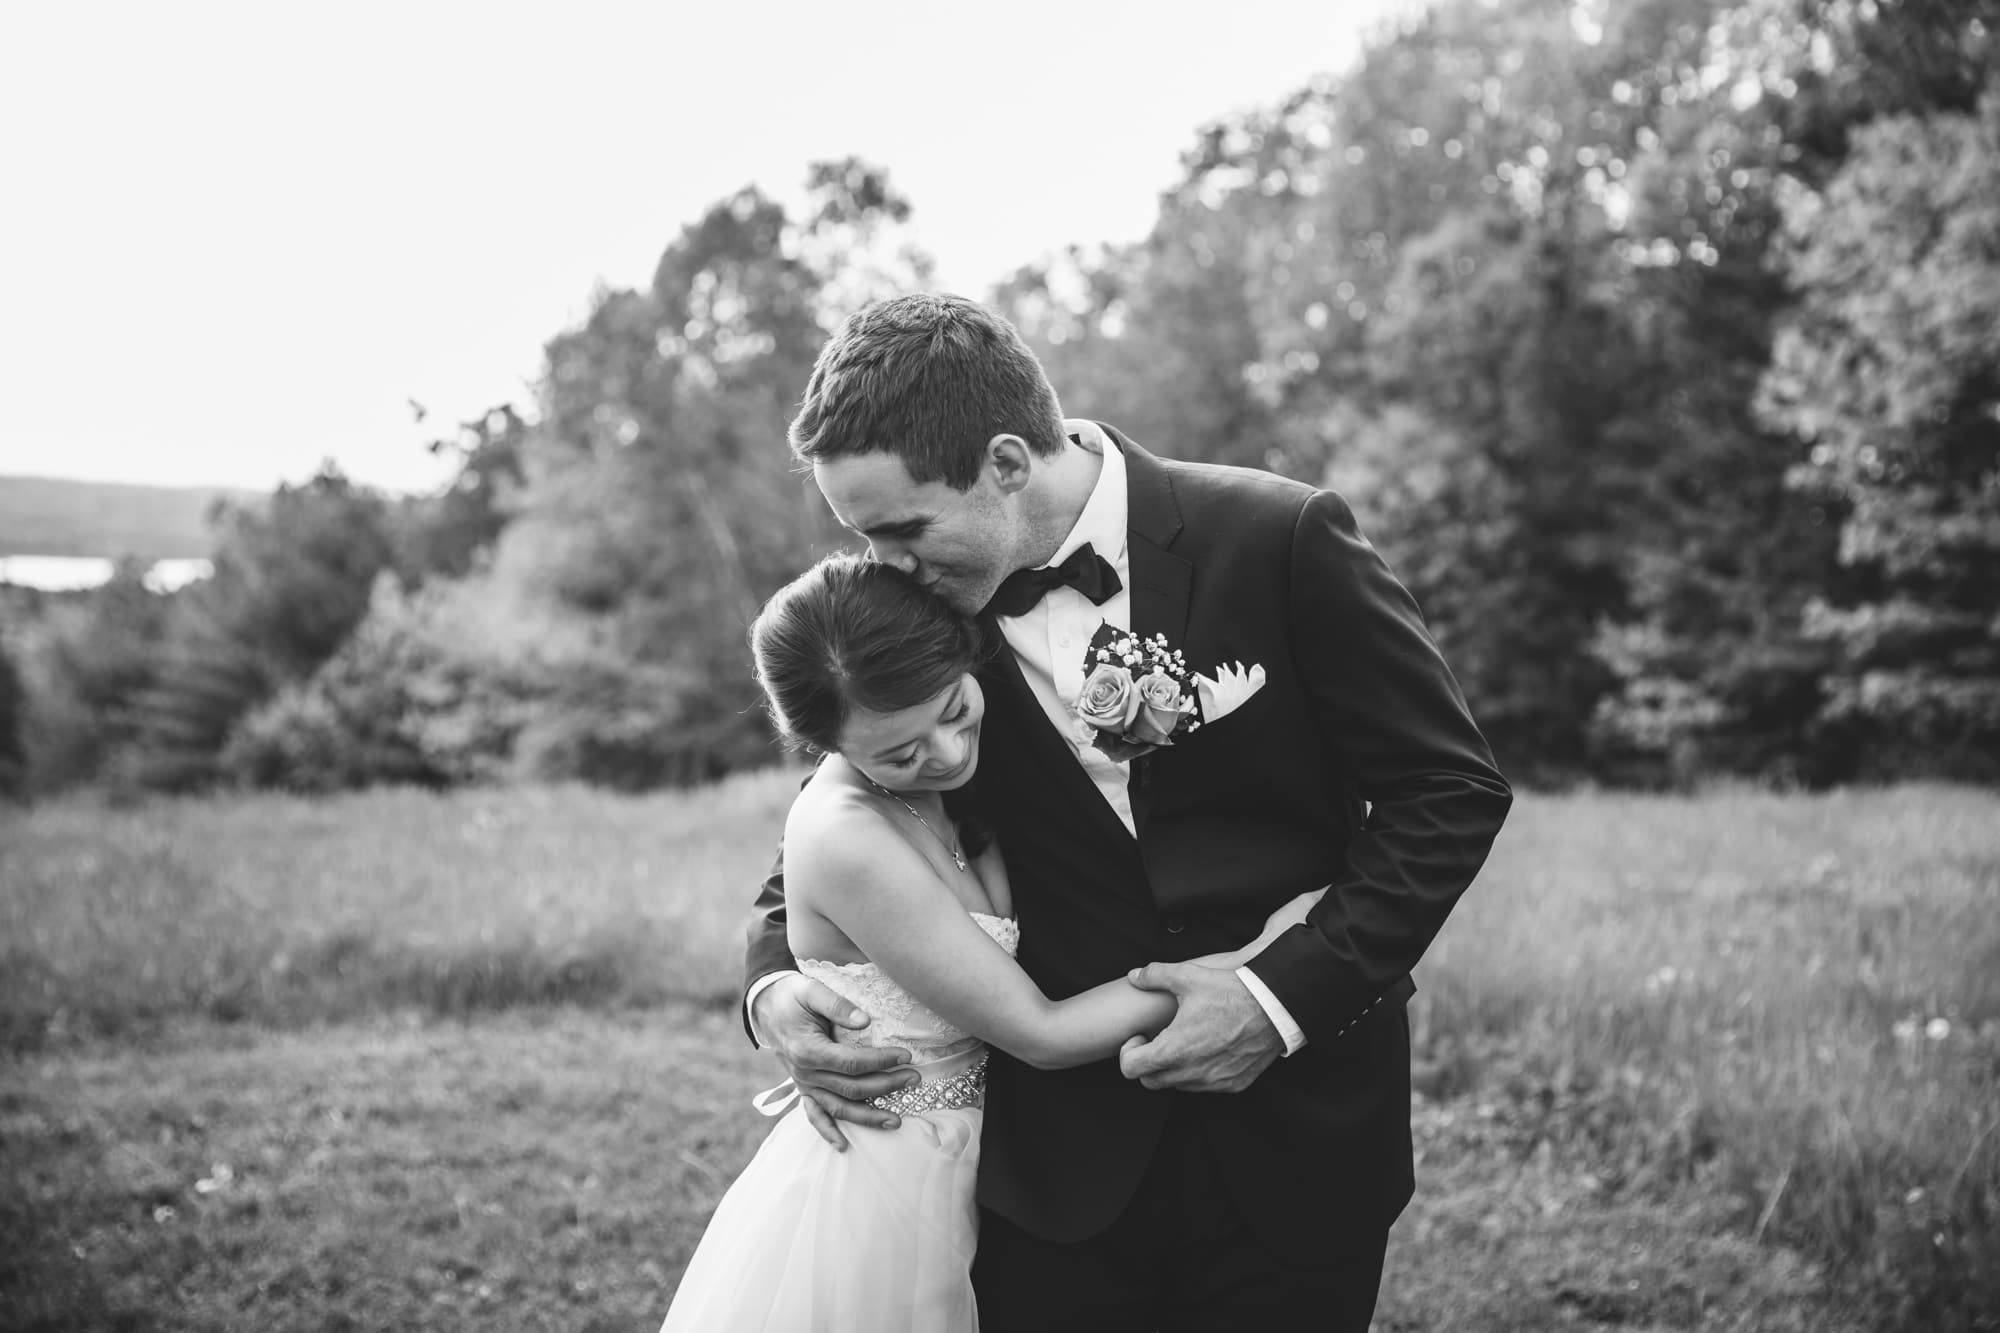 This natural portrait of a bride and groom kissing is one of the best wedding photographs of 2016